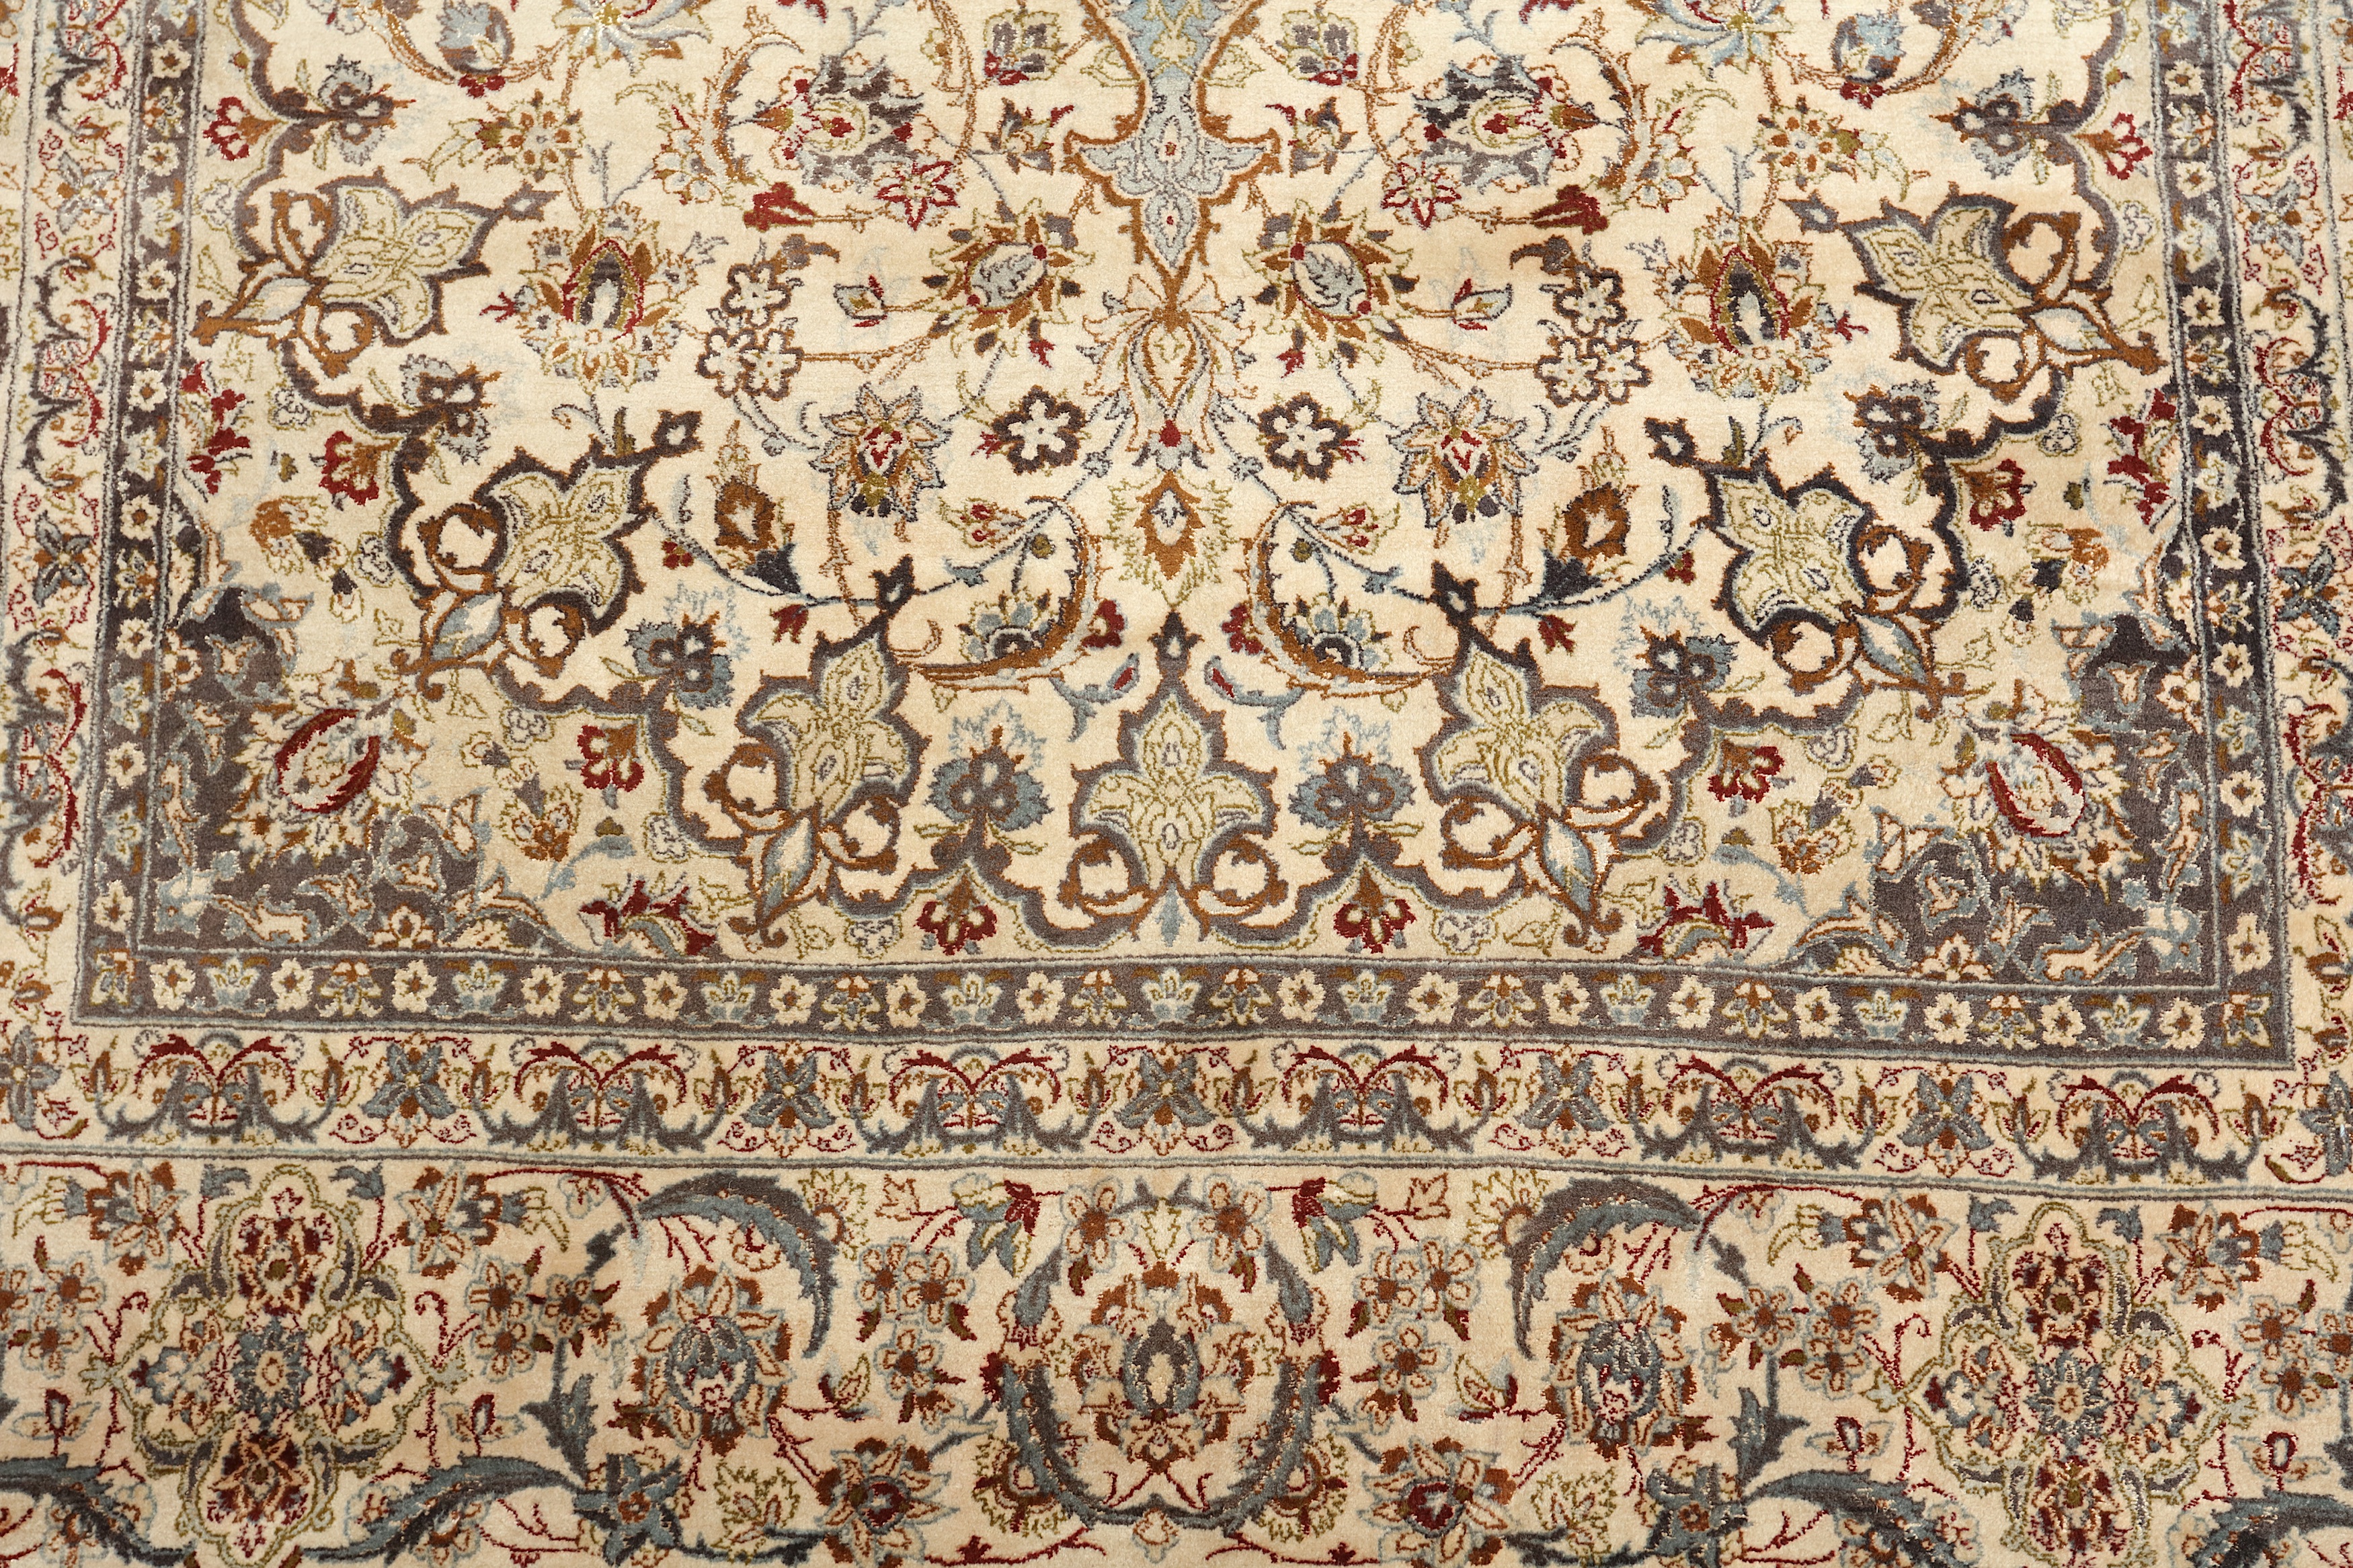 VERY FINE PART SILK ISFAHAN RUG, CENTRAL PERSIA - Image 5 of 8